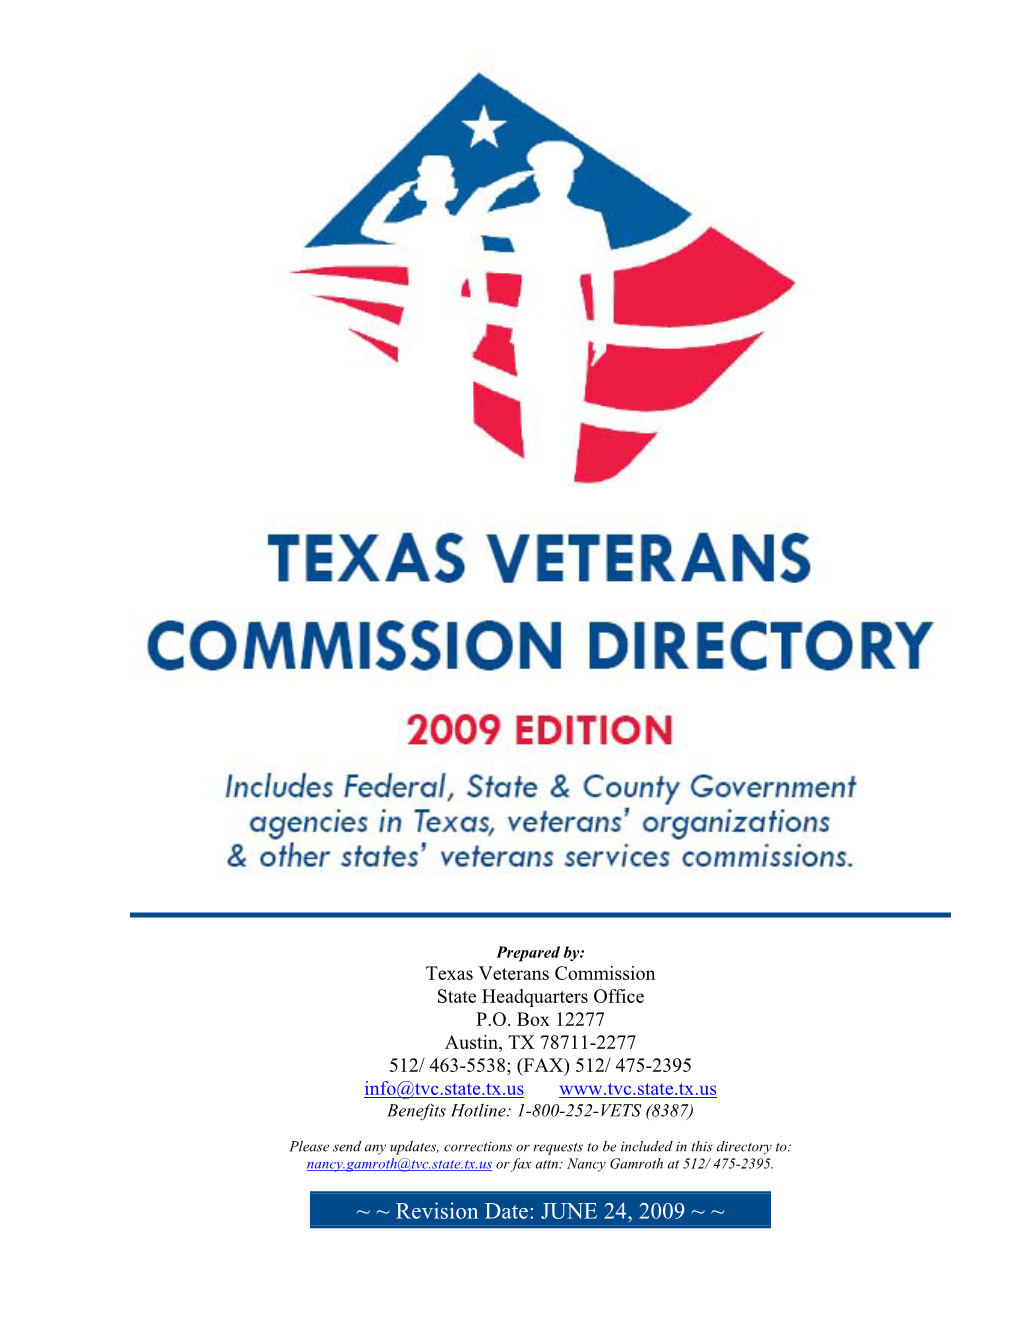 Texas Veterans Commission State Headquarters Office P.O